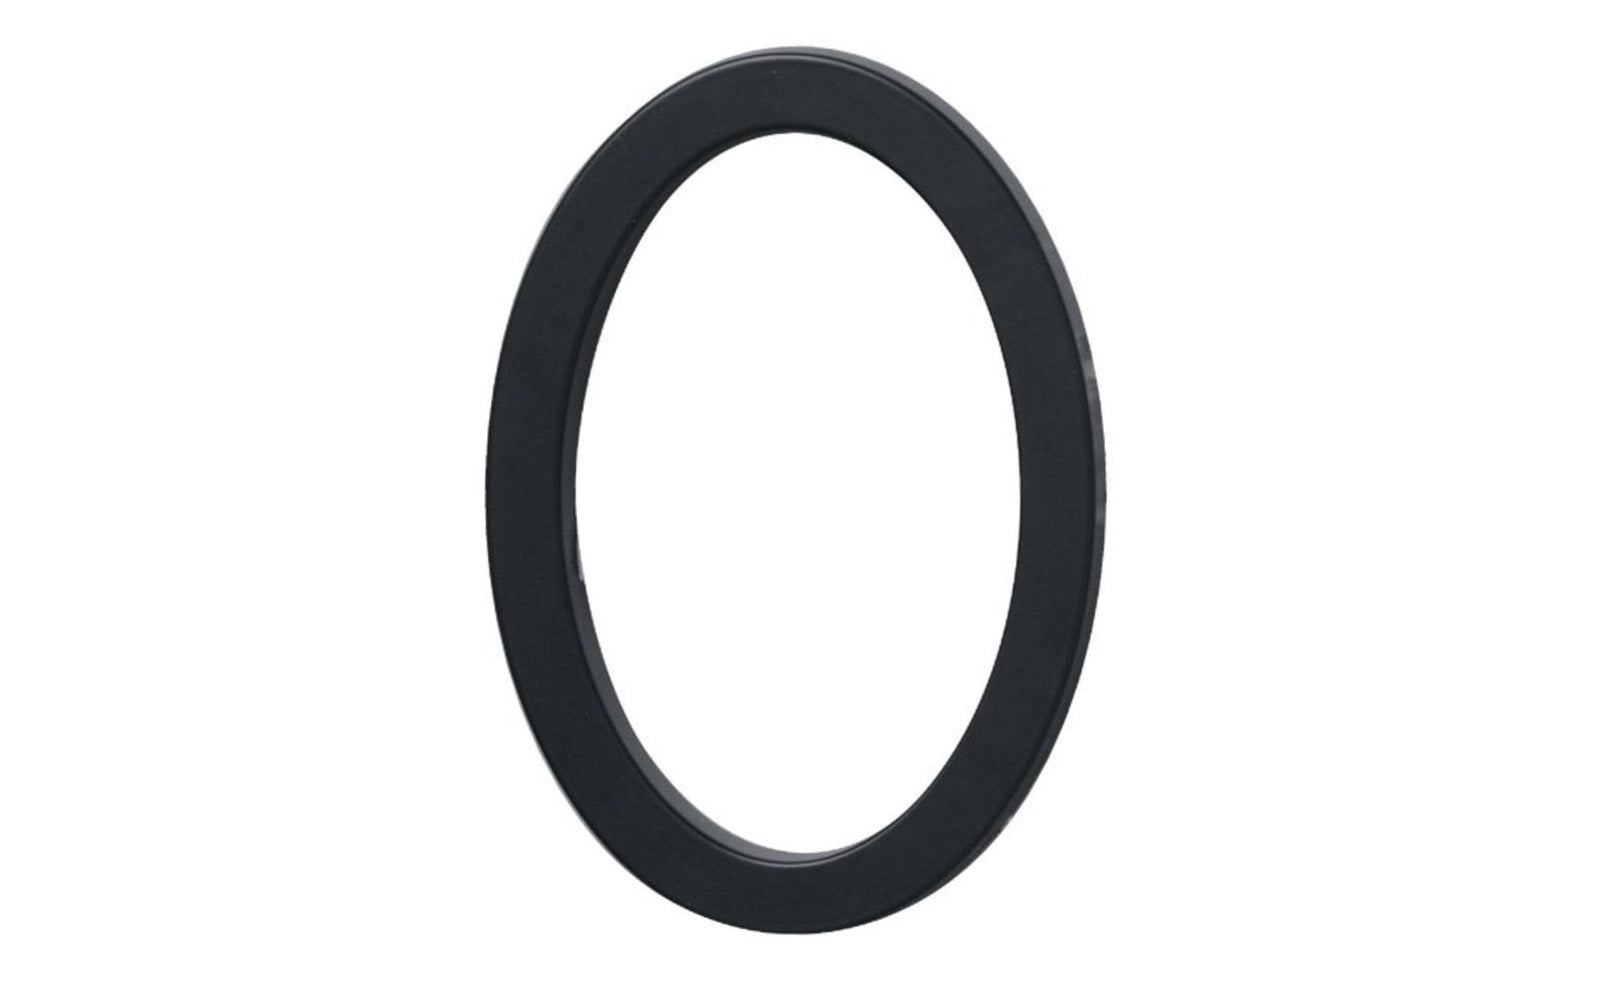 Number Zero House Number in a classy architectural style design. Satin black finish. 6